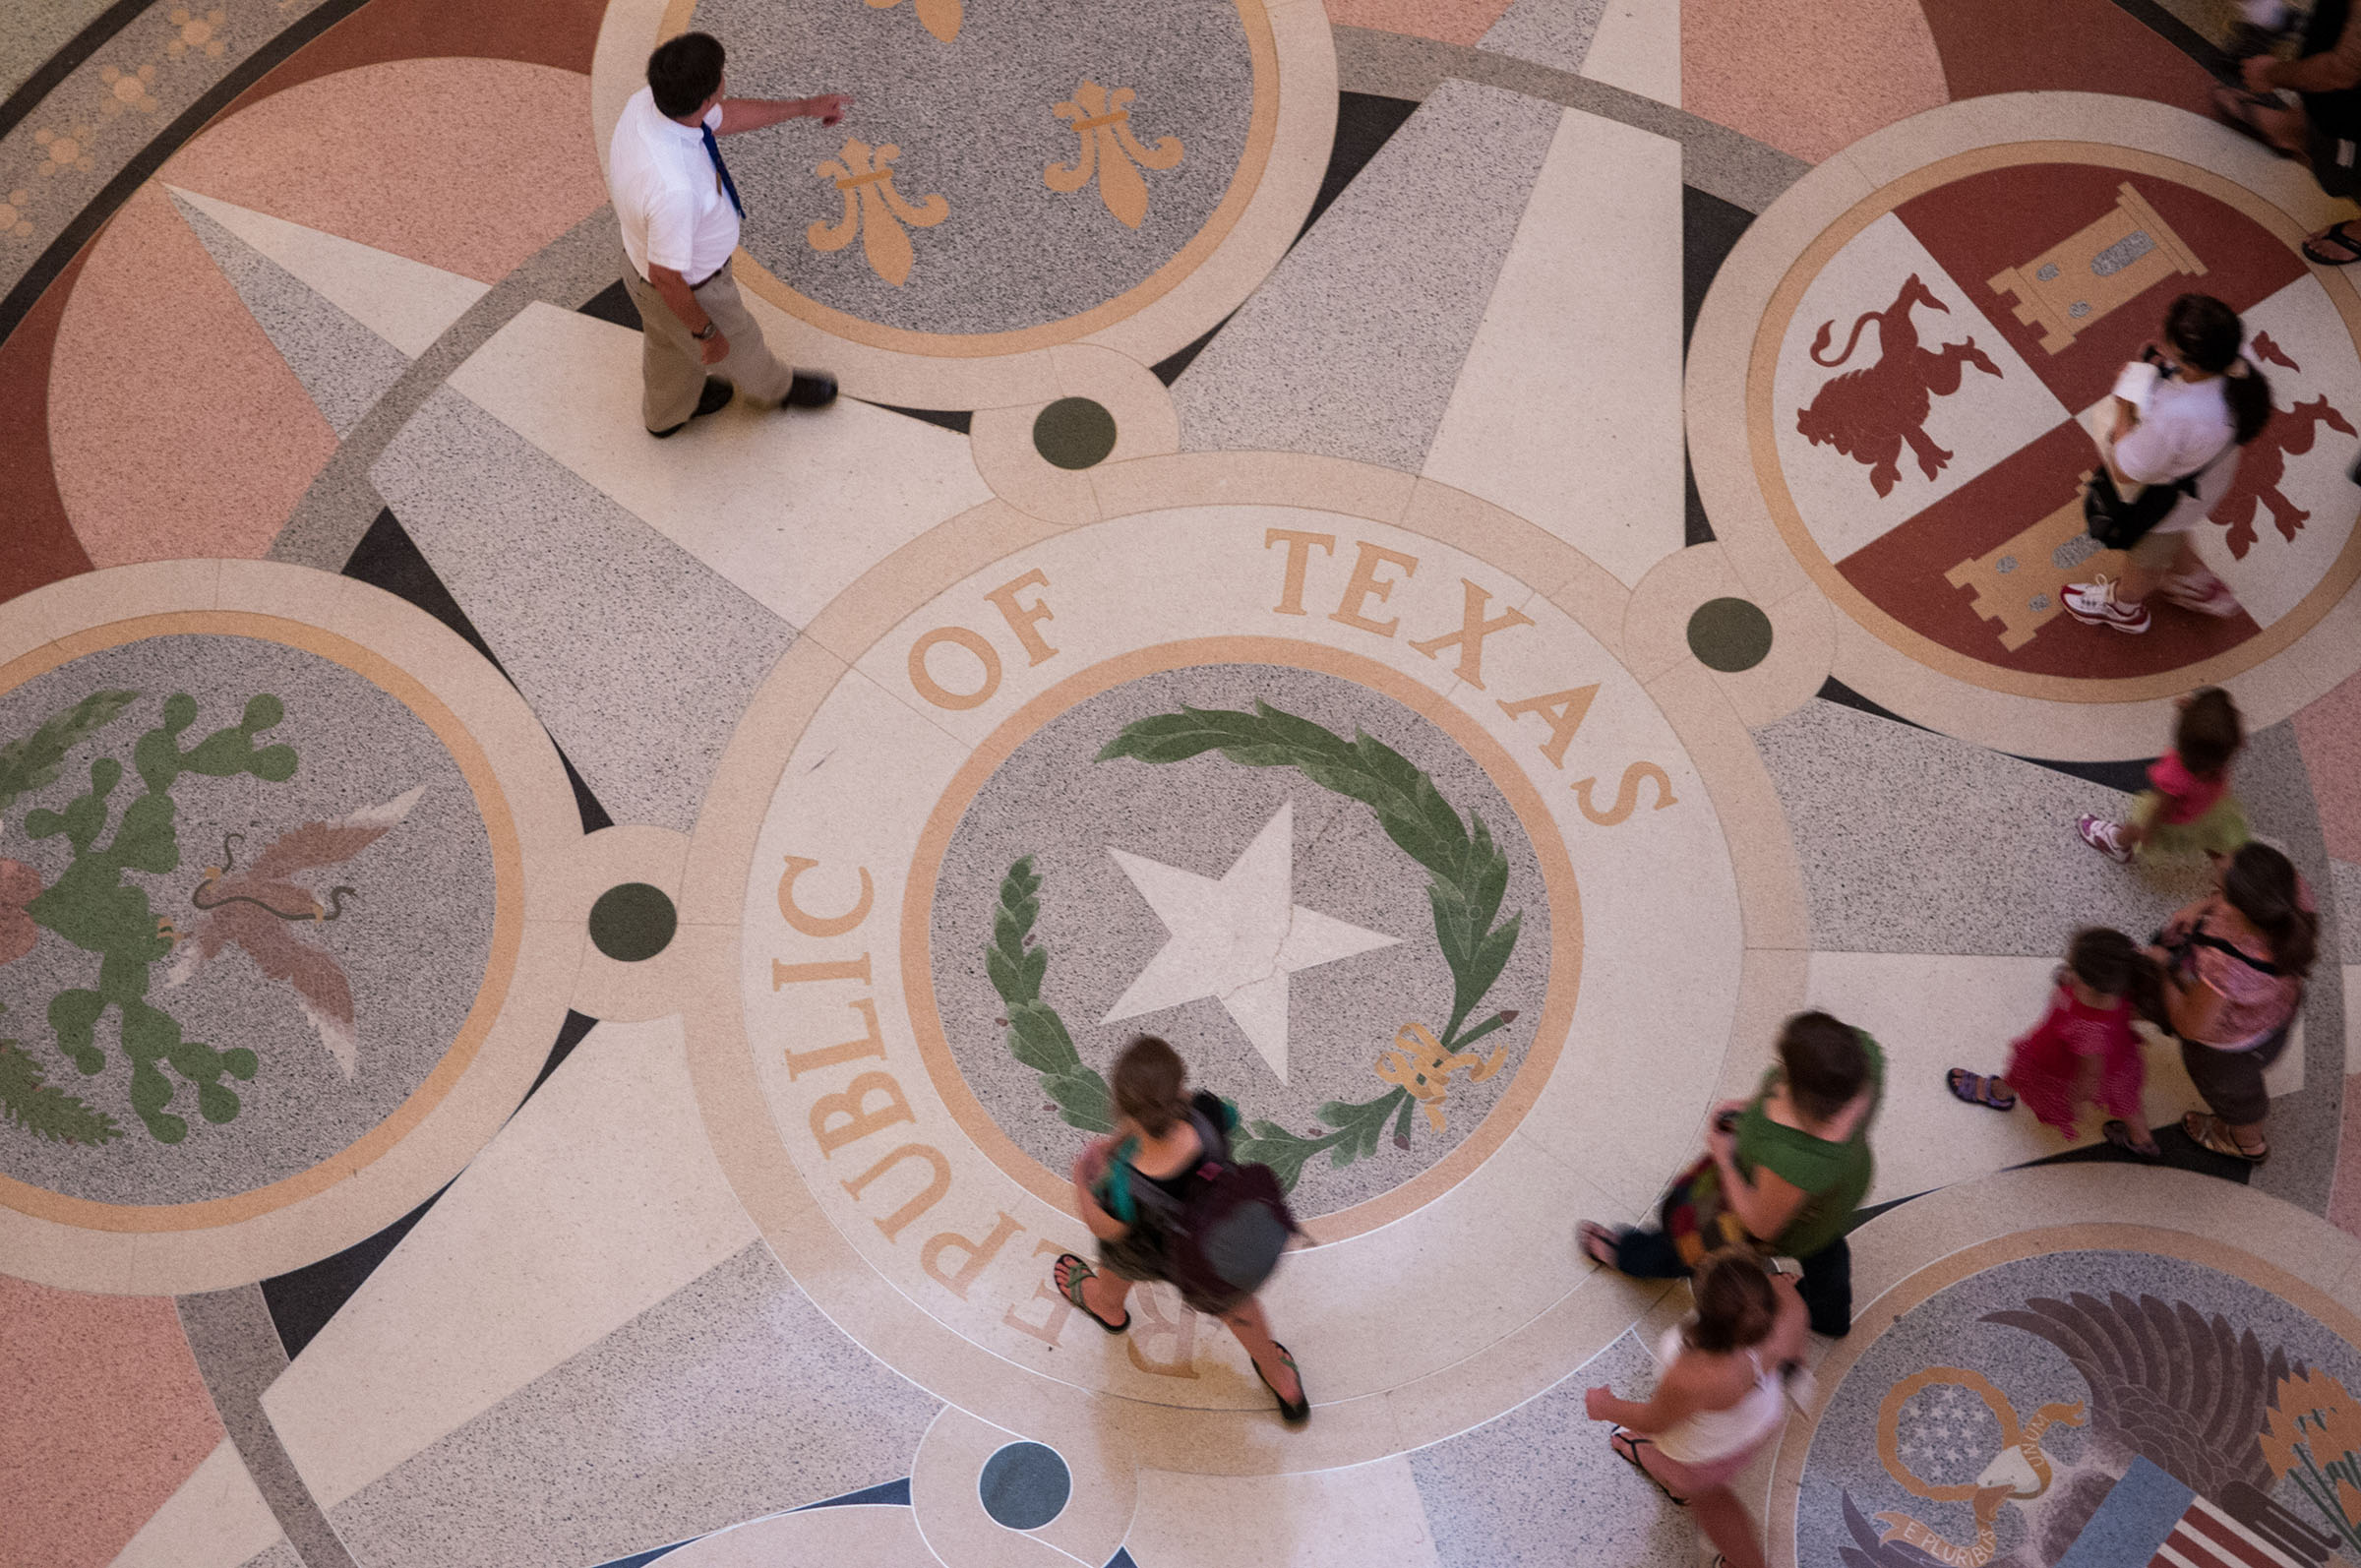 A small group of people walk across a decorative floor reading "Republic of Texas"